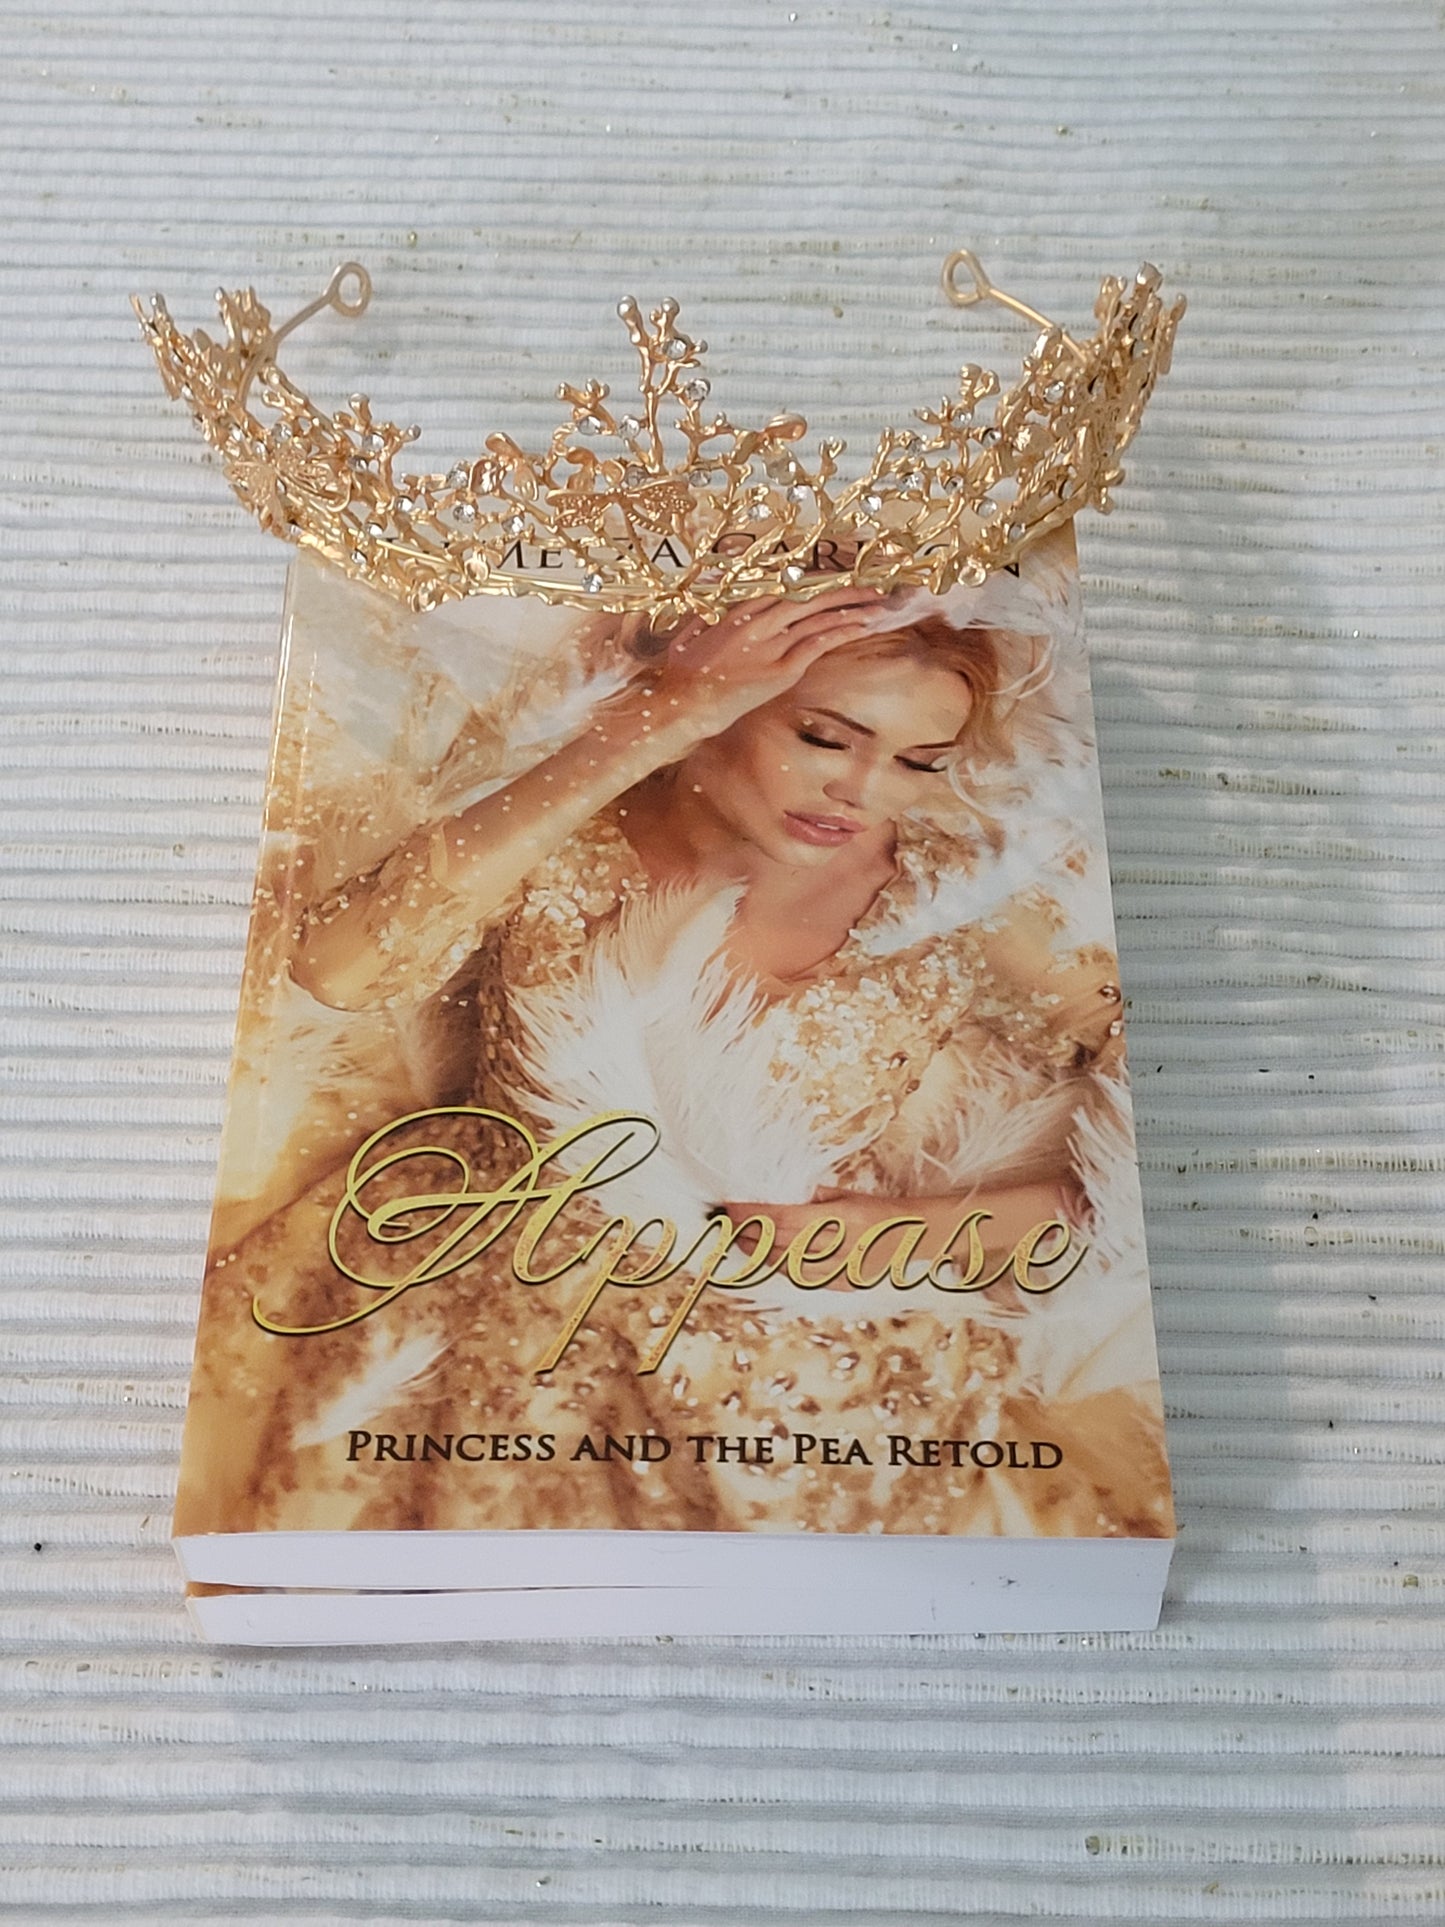 A steamy romantasy fairytale retelling of the Princess and the Pea for fans of Sarah J Maas, ACOTAR, Raven Kennedy, Charlaine Harris, Juliet Marillier and Rebecca Yarros